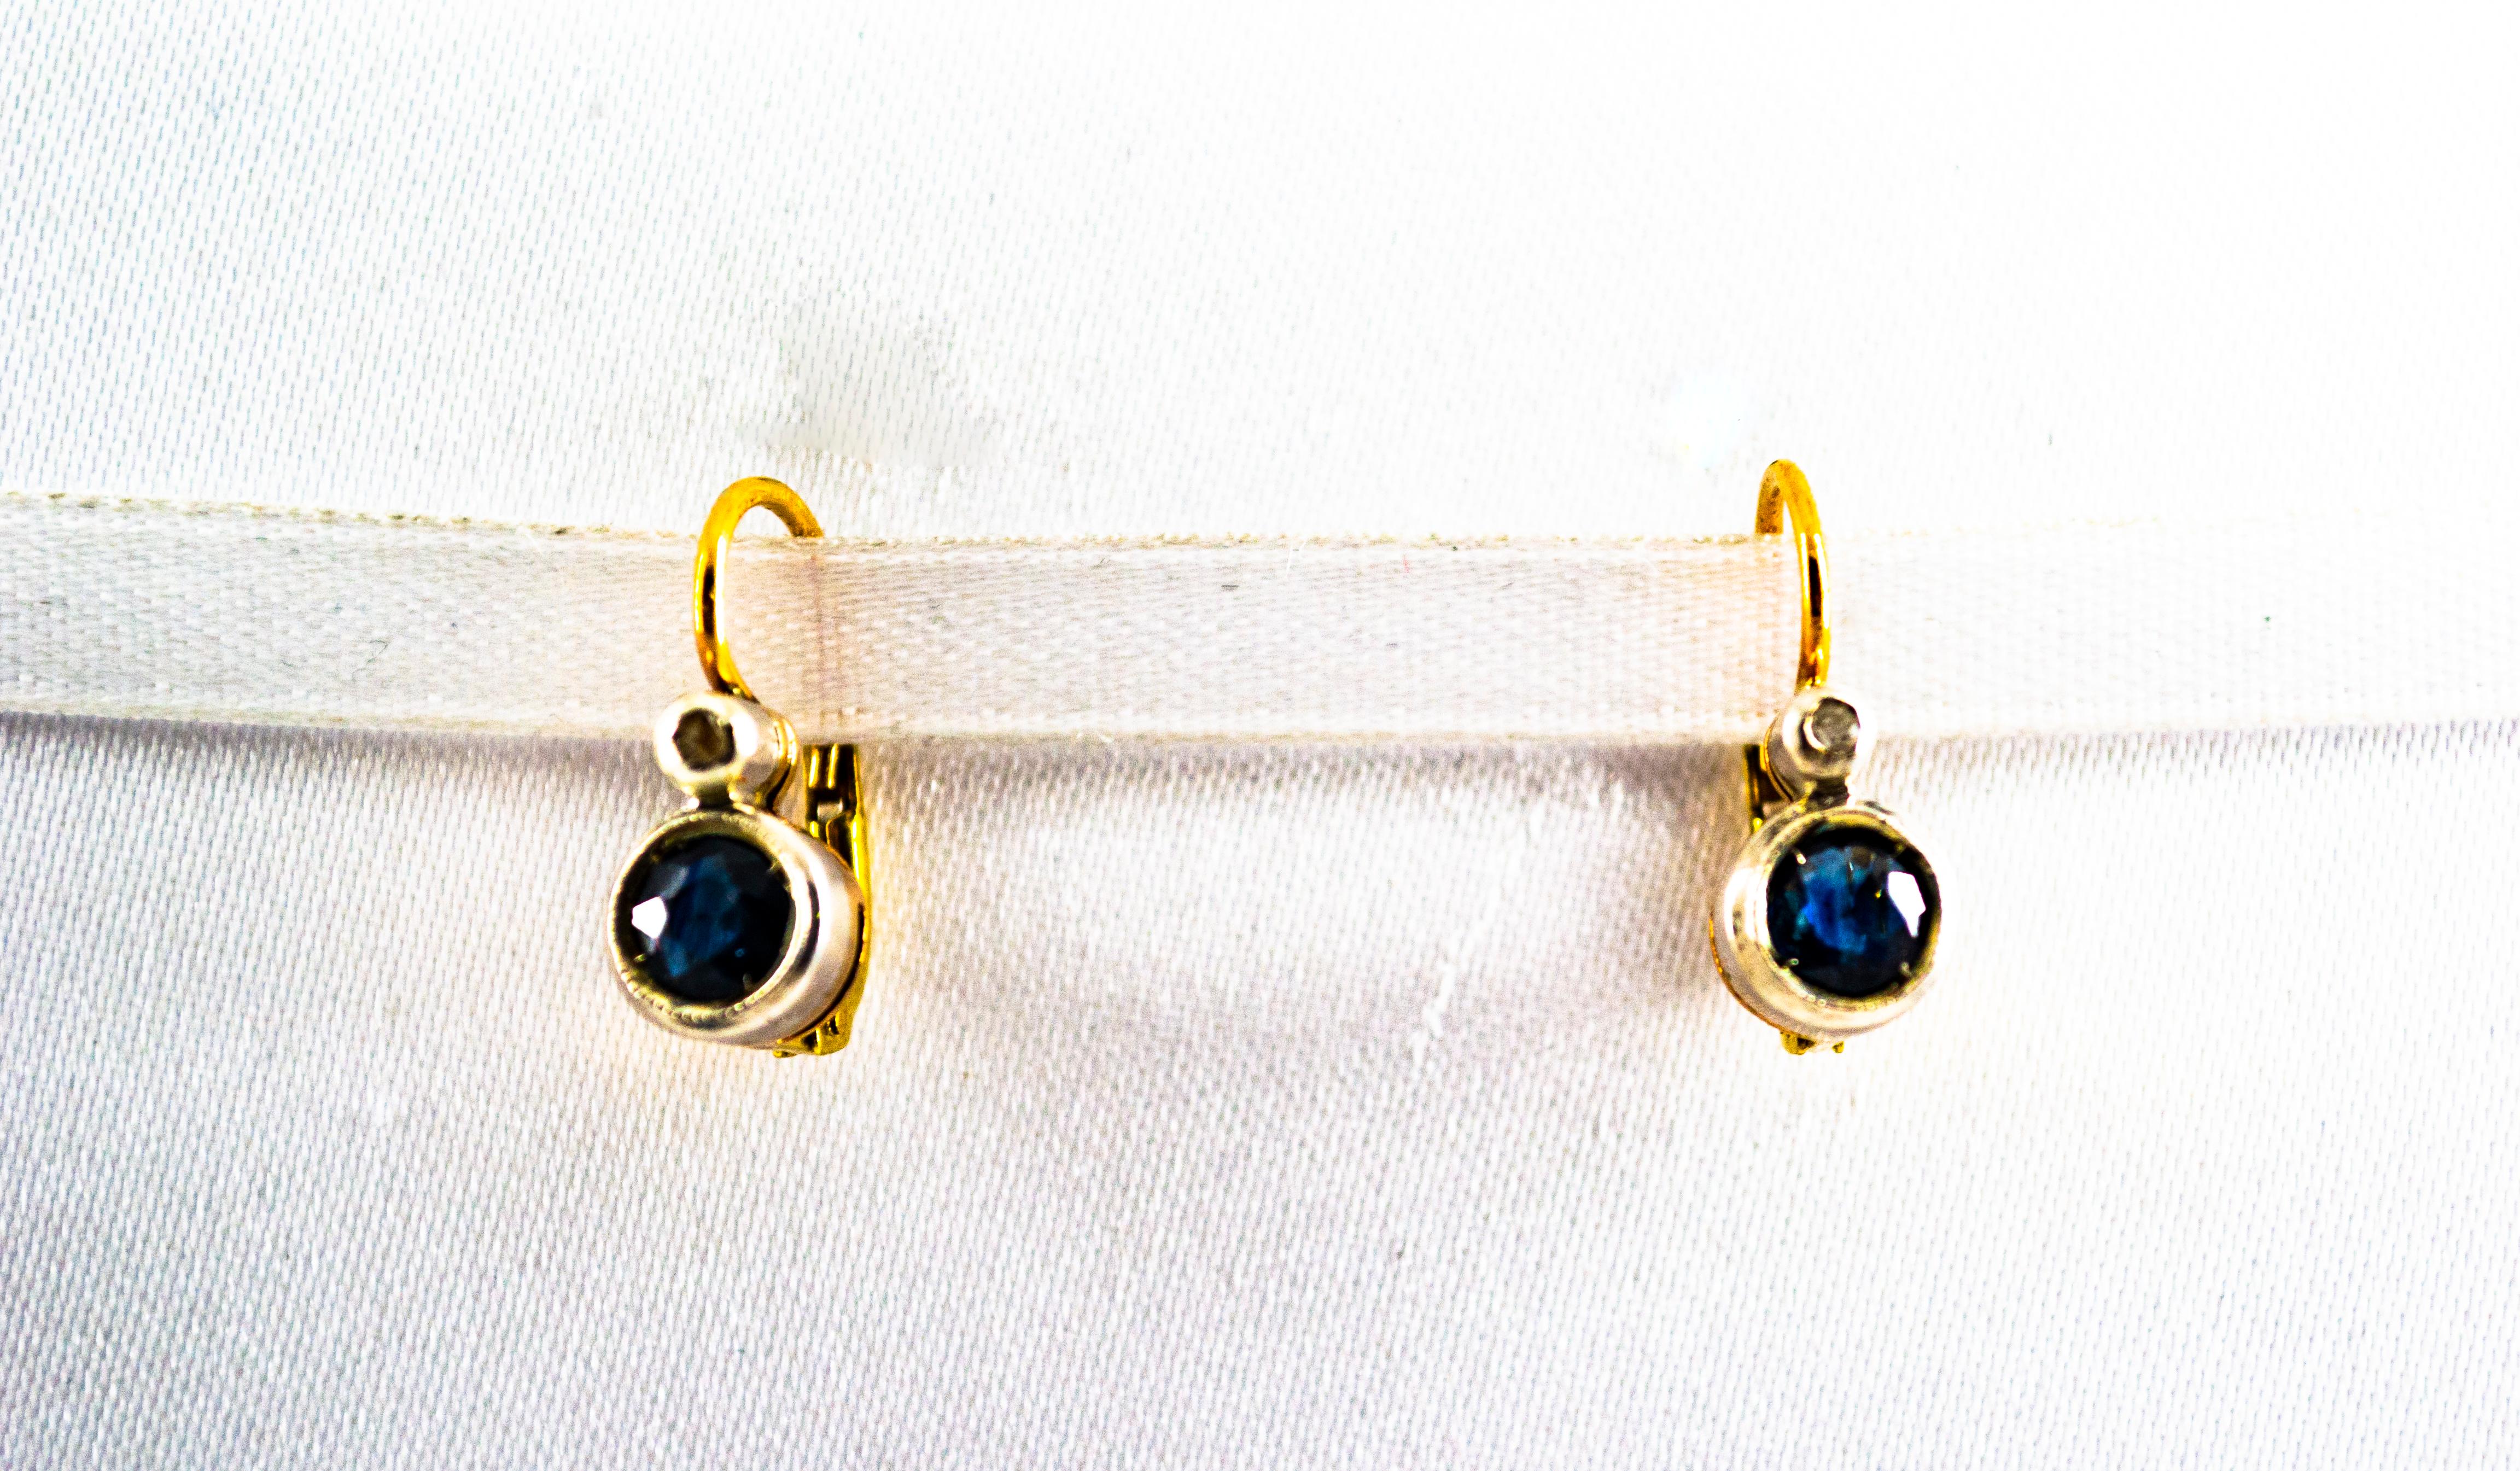 These Lever-Back Earrings are made of 9K Yellow Gold and Sterling Silver.
These Earrings have 0.02 Carats of White Rose Cut Diamonds.
These Earrings have also 1.00 Carat of Blue Sapphires.
These Earrings are available also with Rubies or